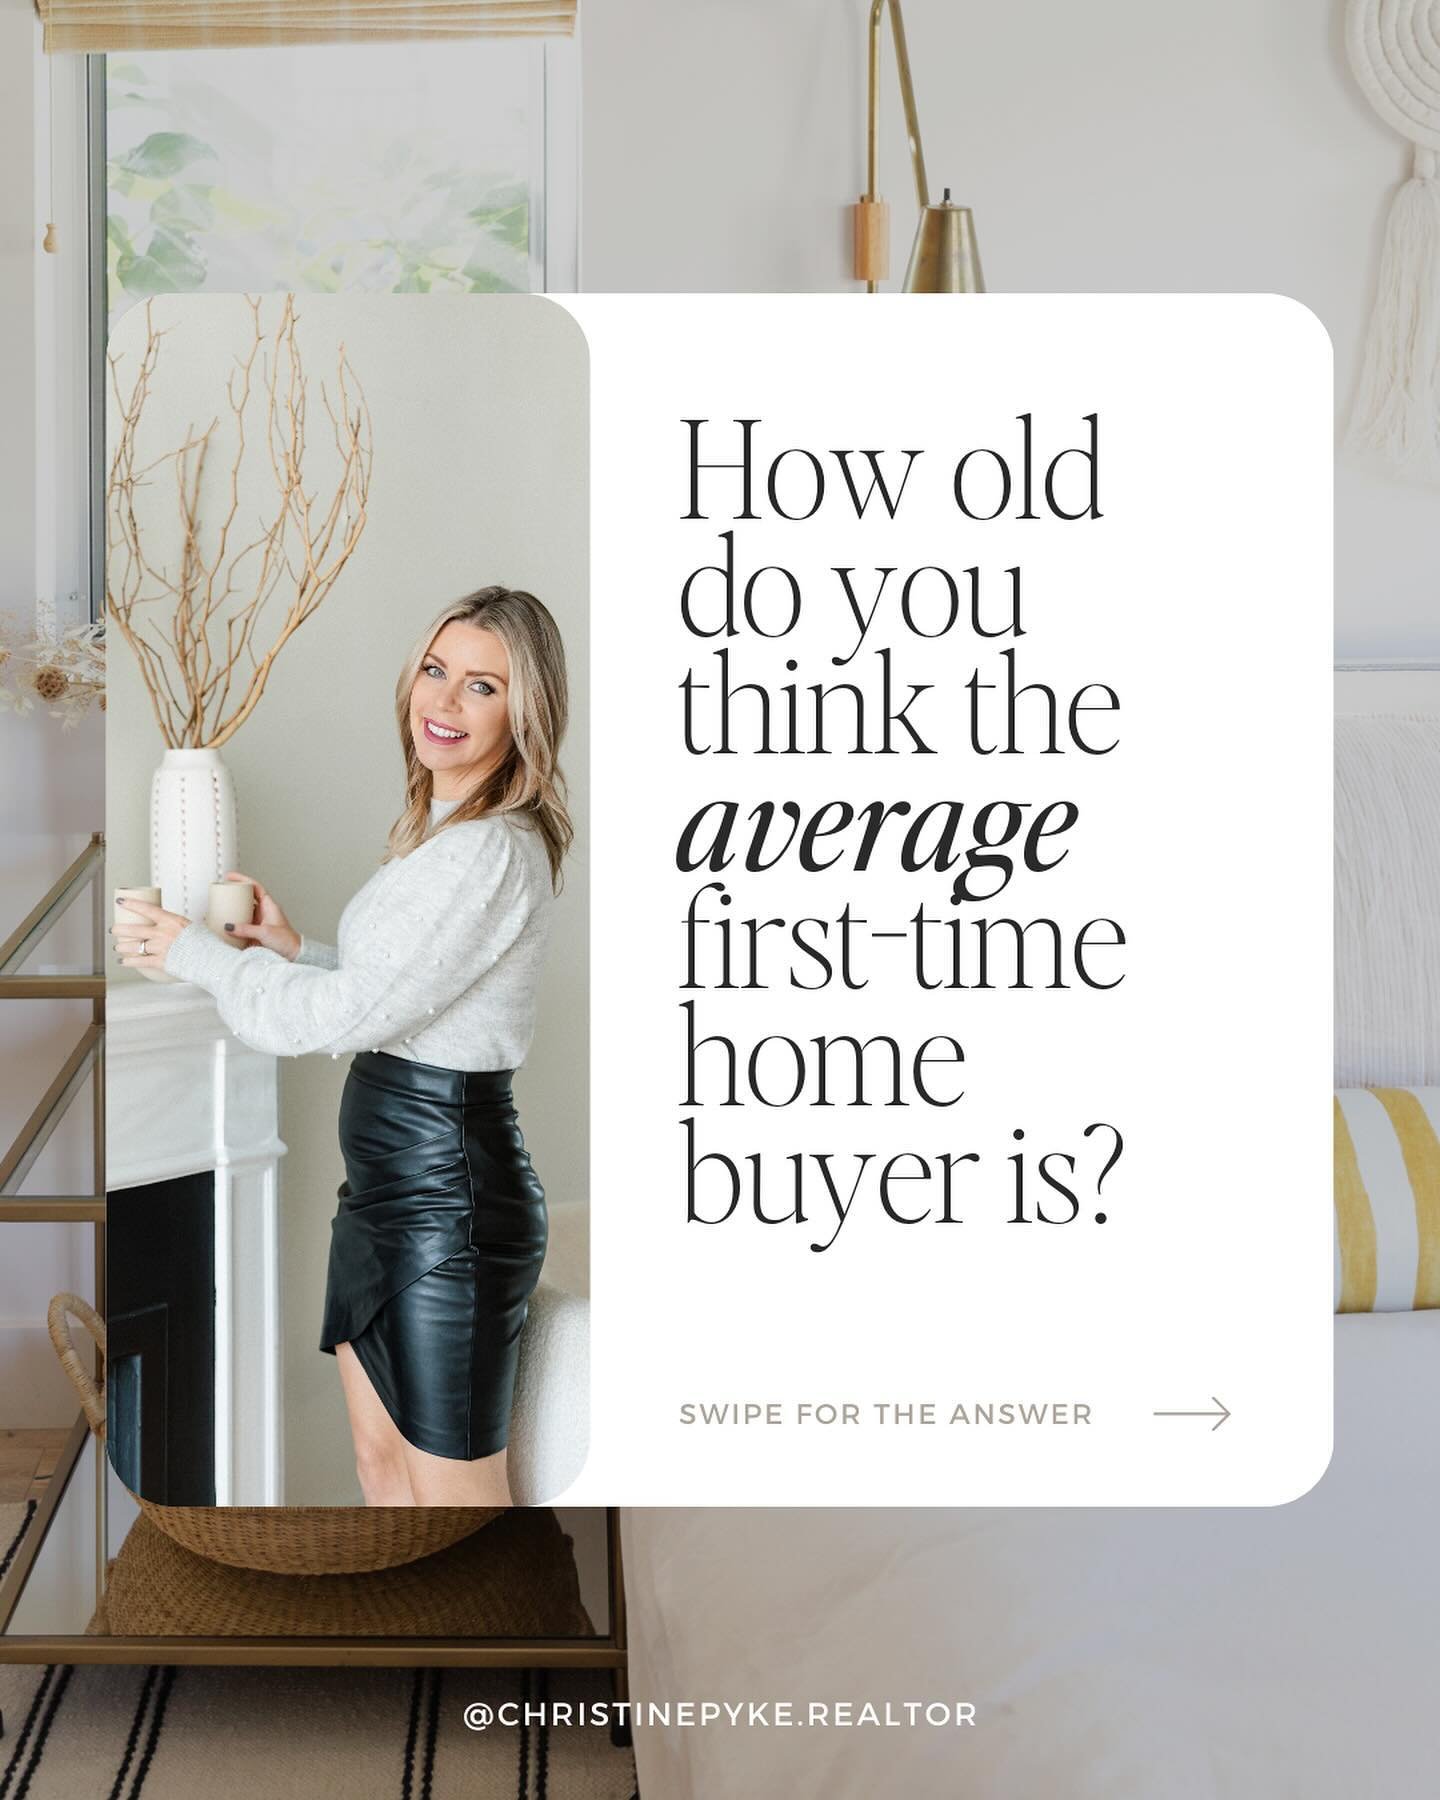 📈The stat is out there: the average Canadian buys their first home at 36.

But what if your dream home is calling to you sooner (or later)?🏡

Life throws a lot our way, and buying a house is a big decision. Saving for a down payment, navigating the